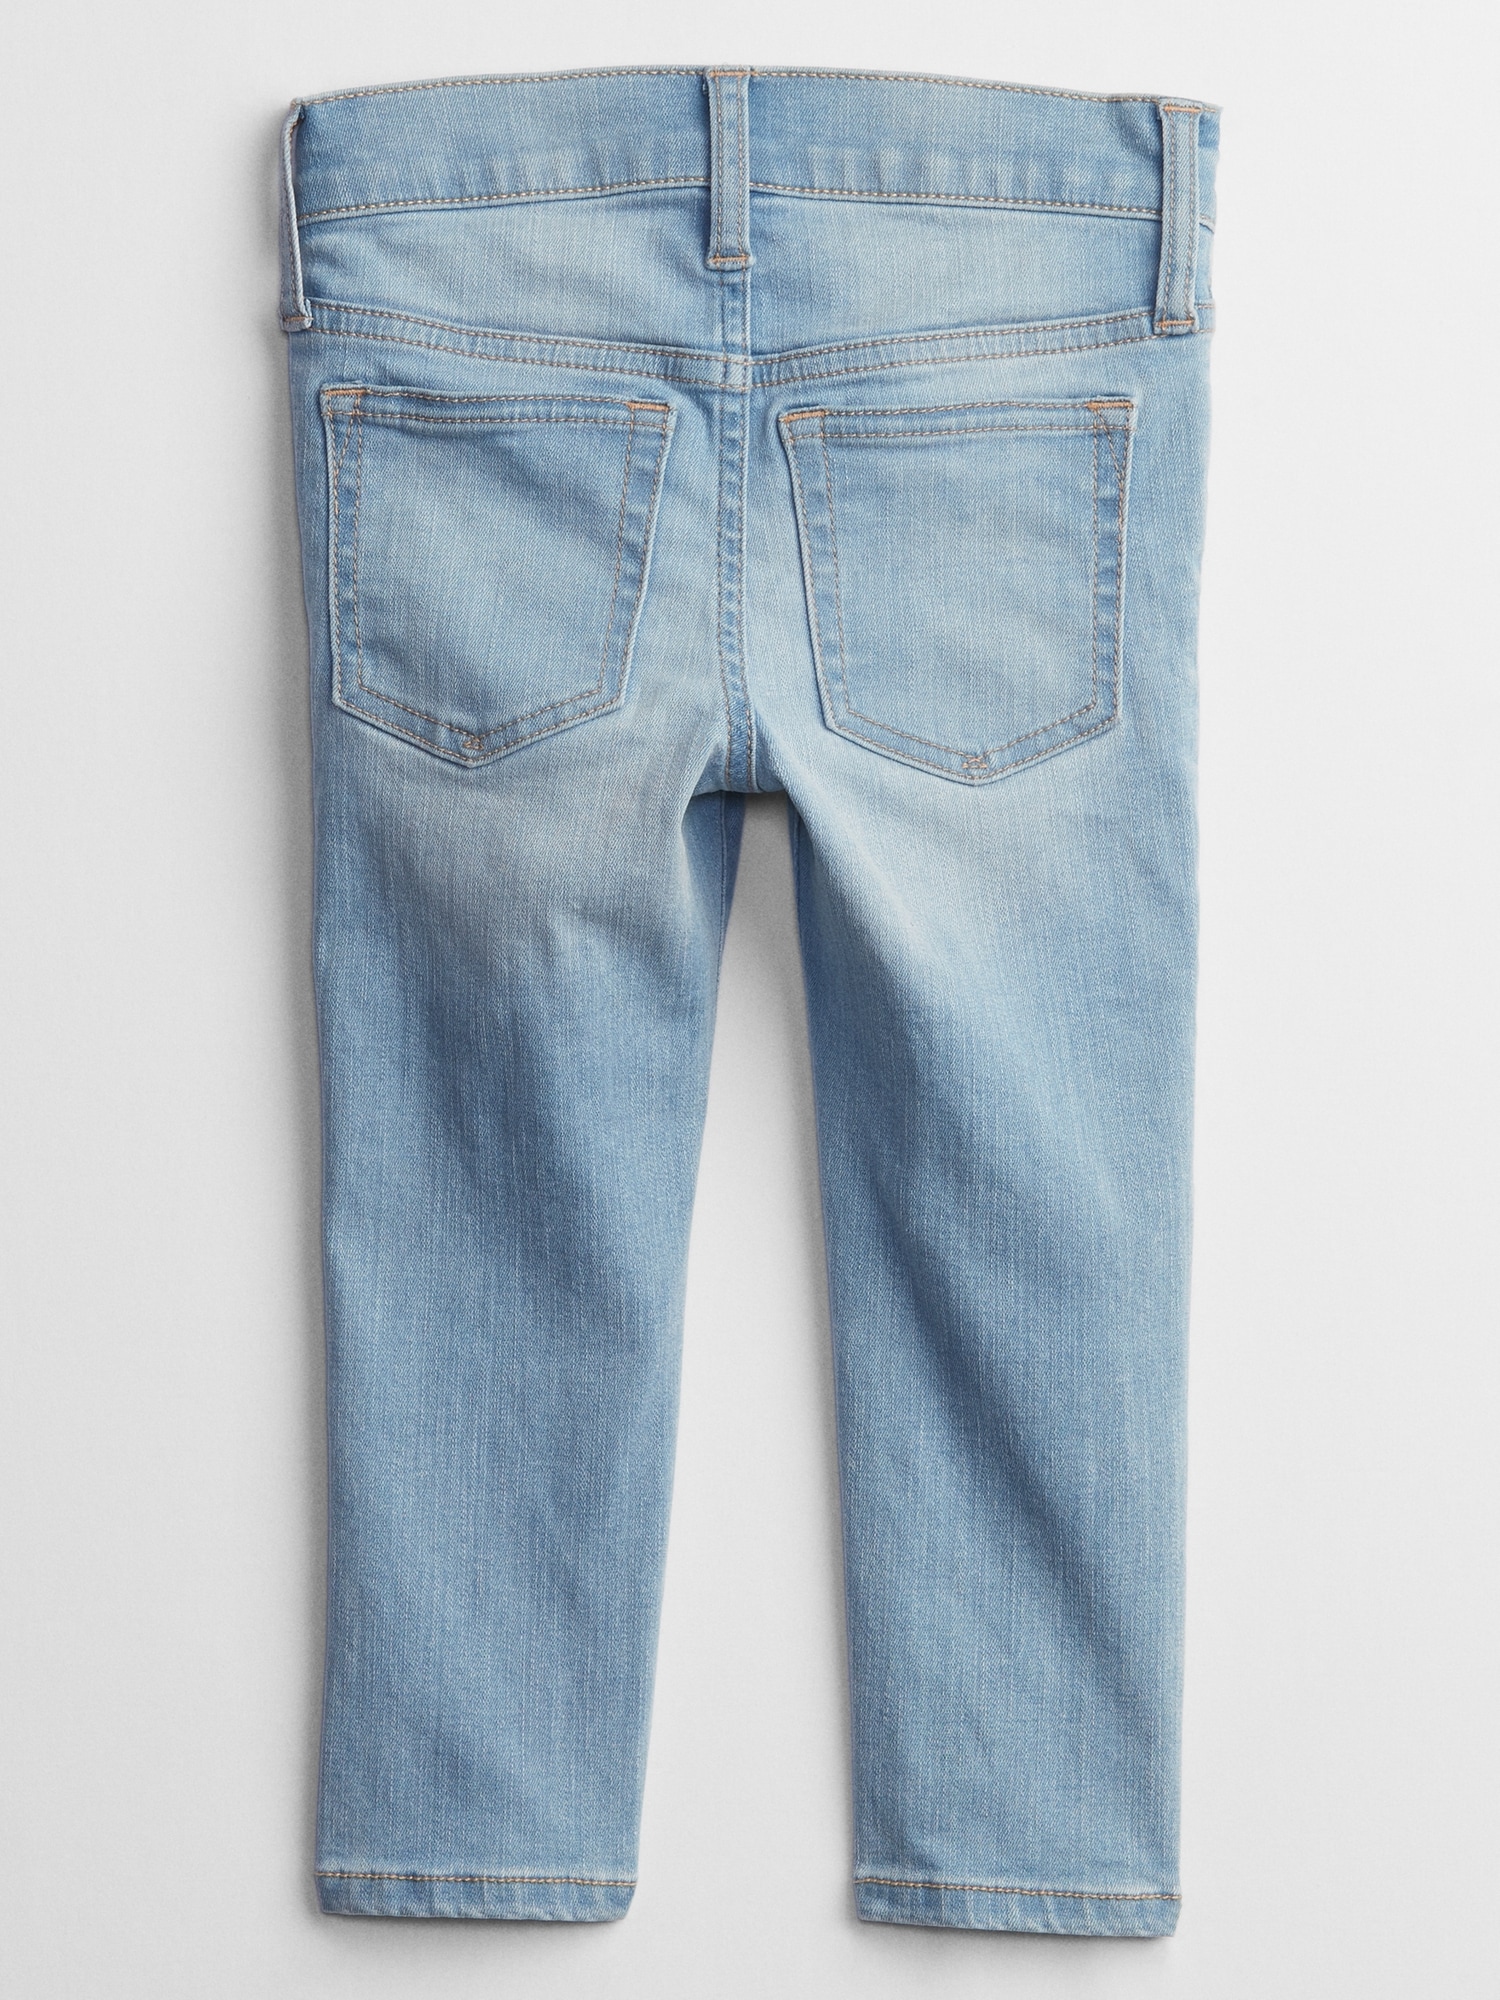 Toddler Skinny Jeans with Washwell | Gap Factory